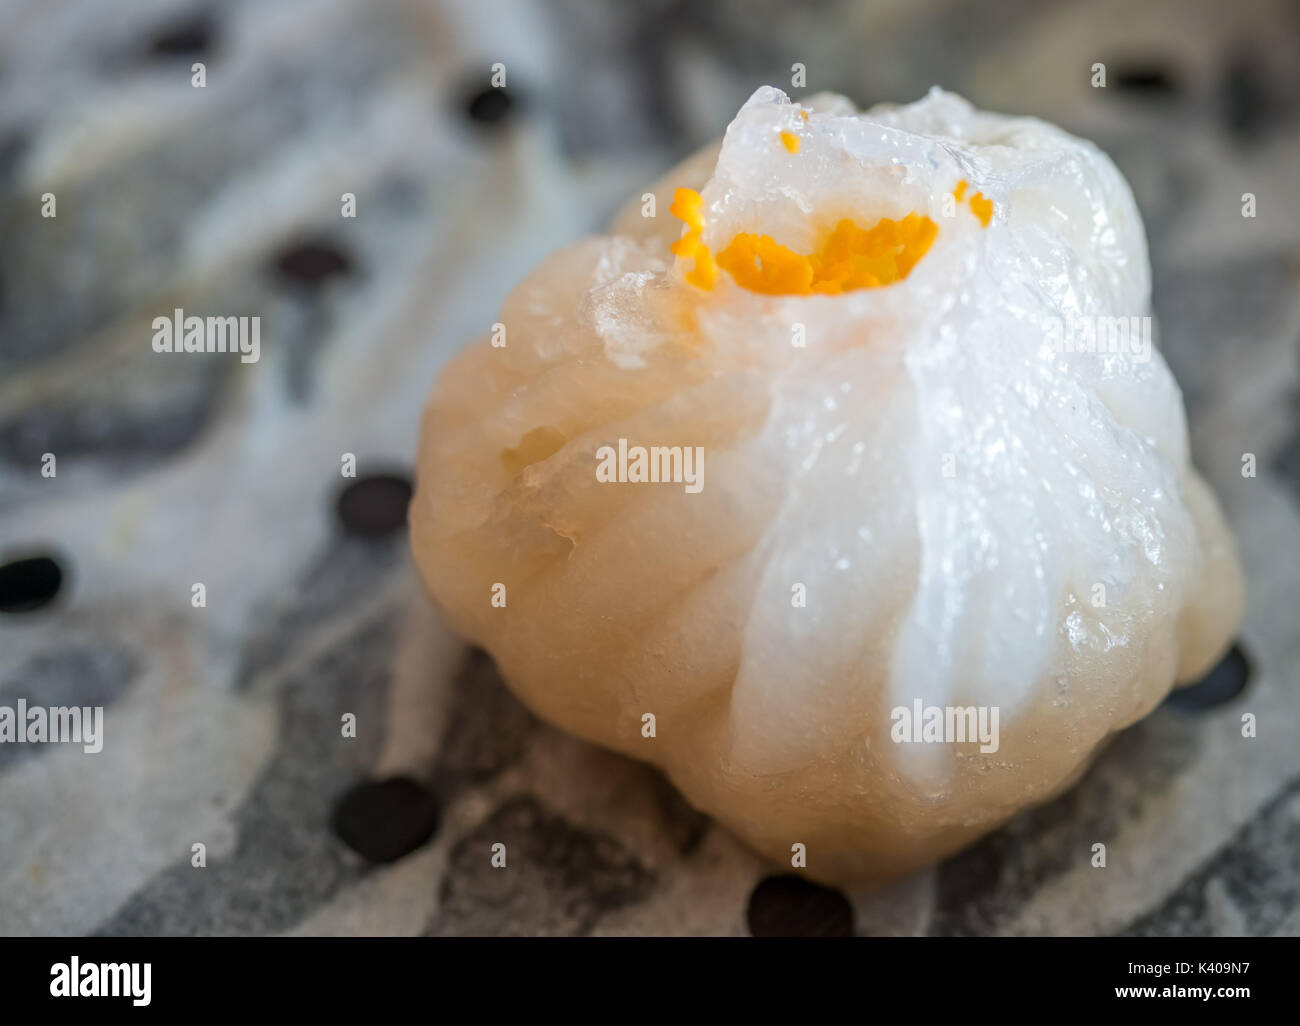 https://c8.alamy.com/comp/K409N7/steamed-chinese-dumpling-shrimp-mold-with-thin-layer-of-starch-eat-K409N7.jpg